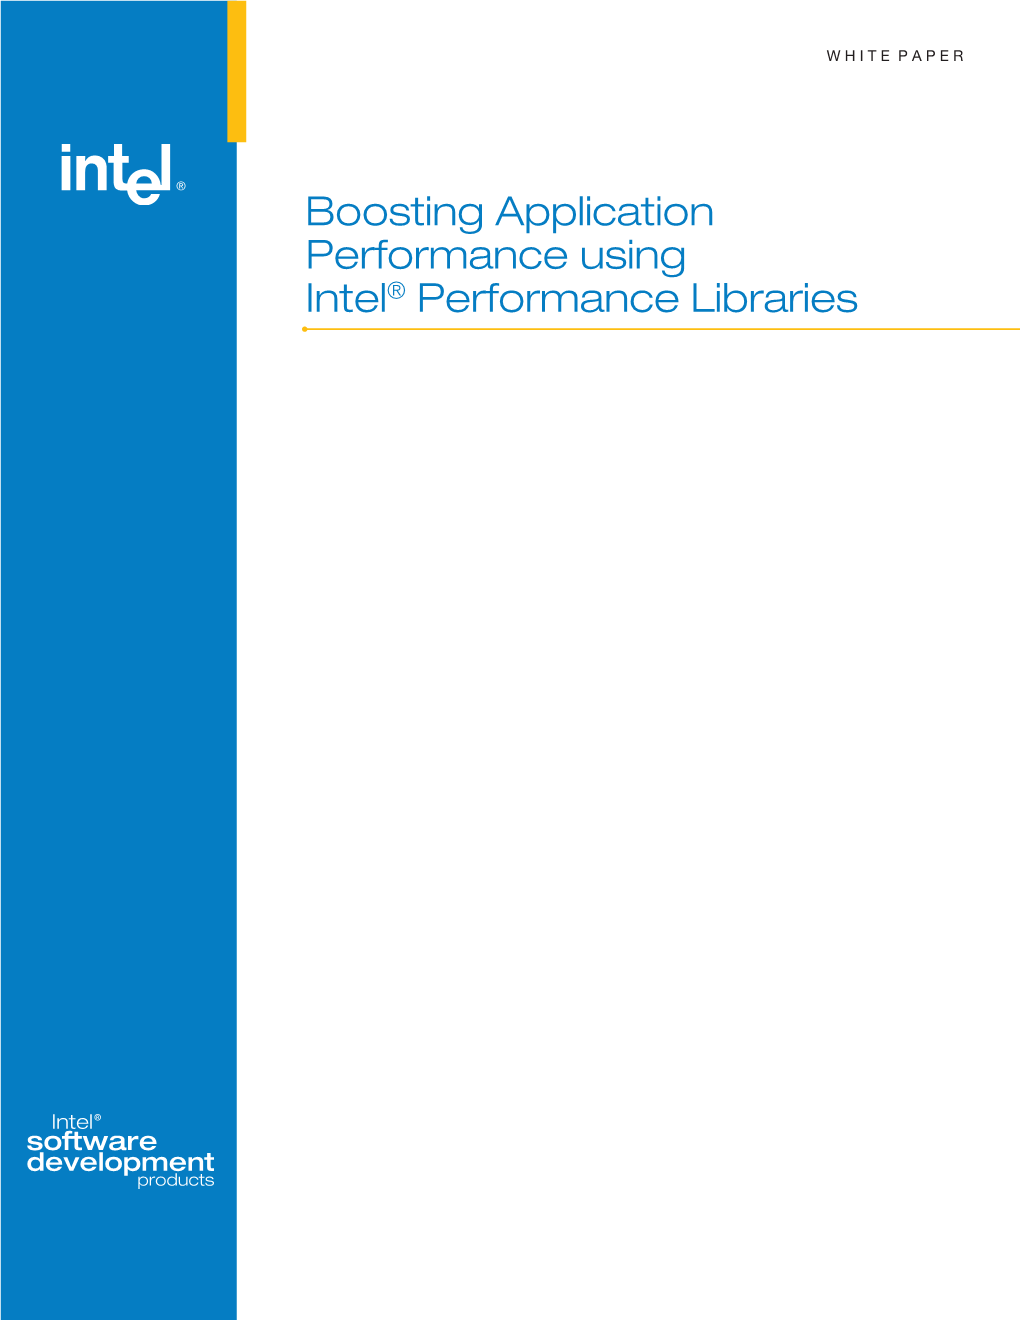 Boosting Application Performance Using Intel® Performance Libraries